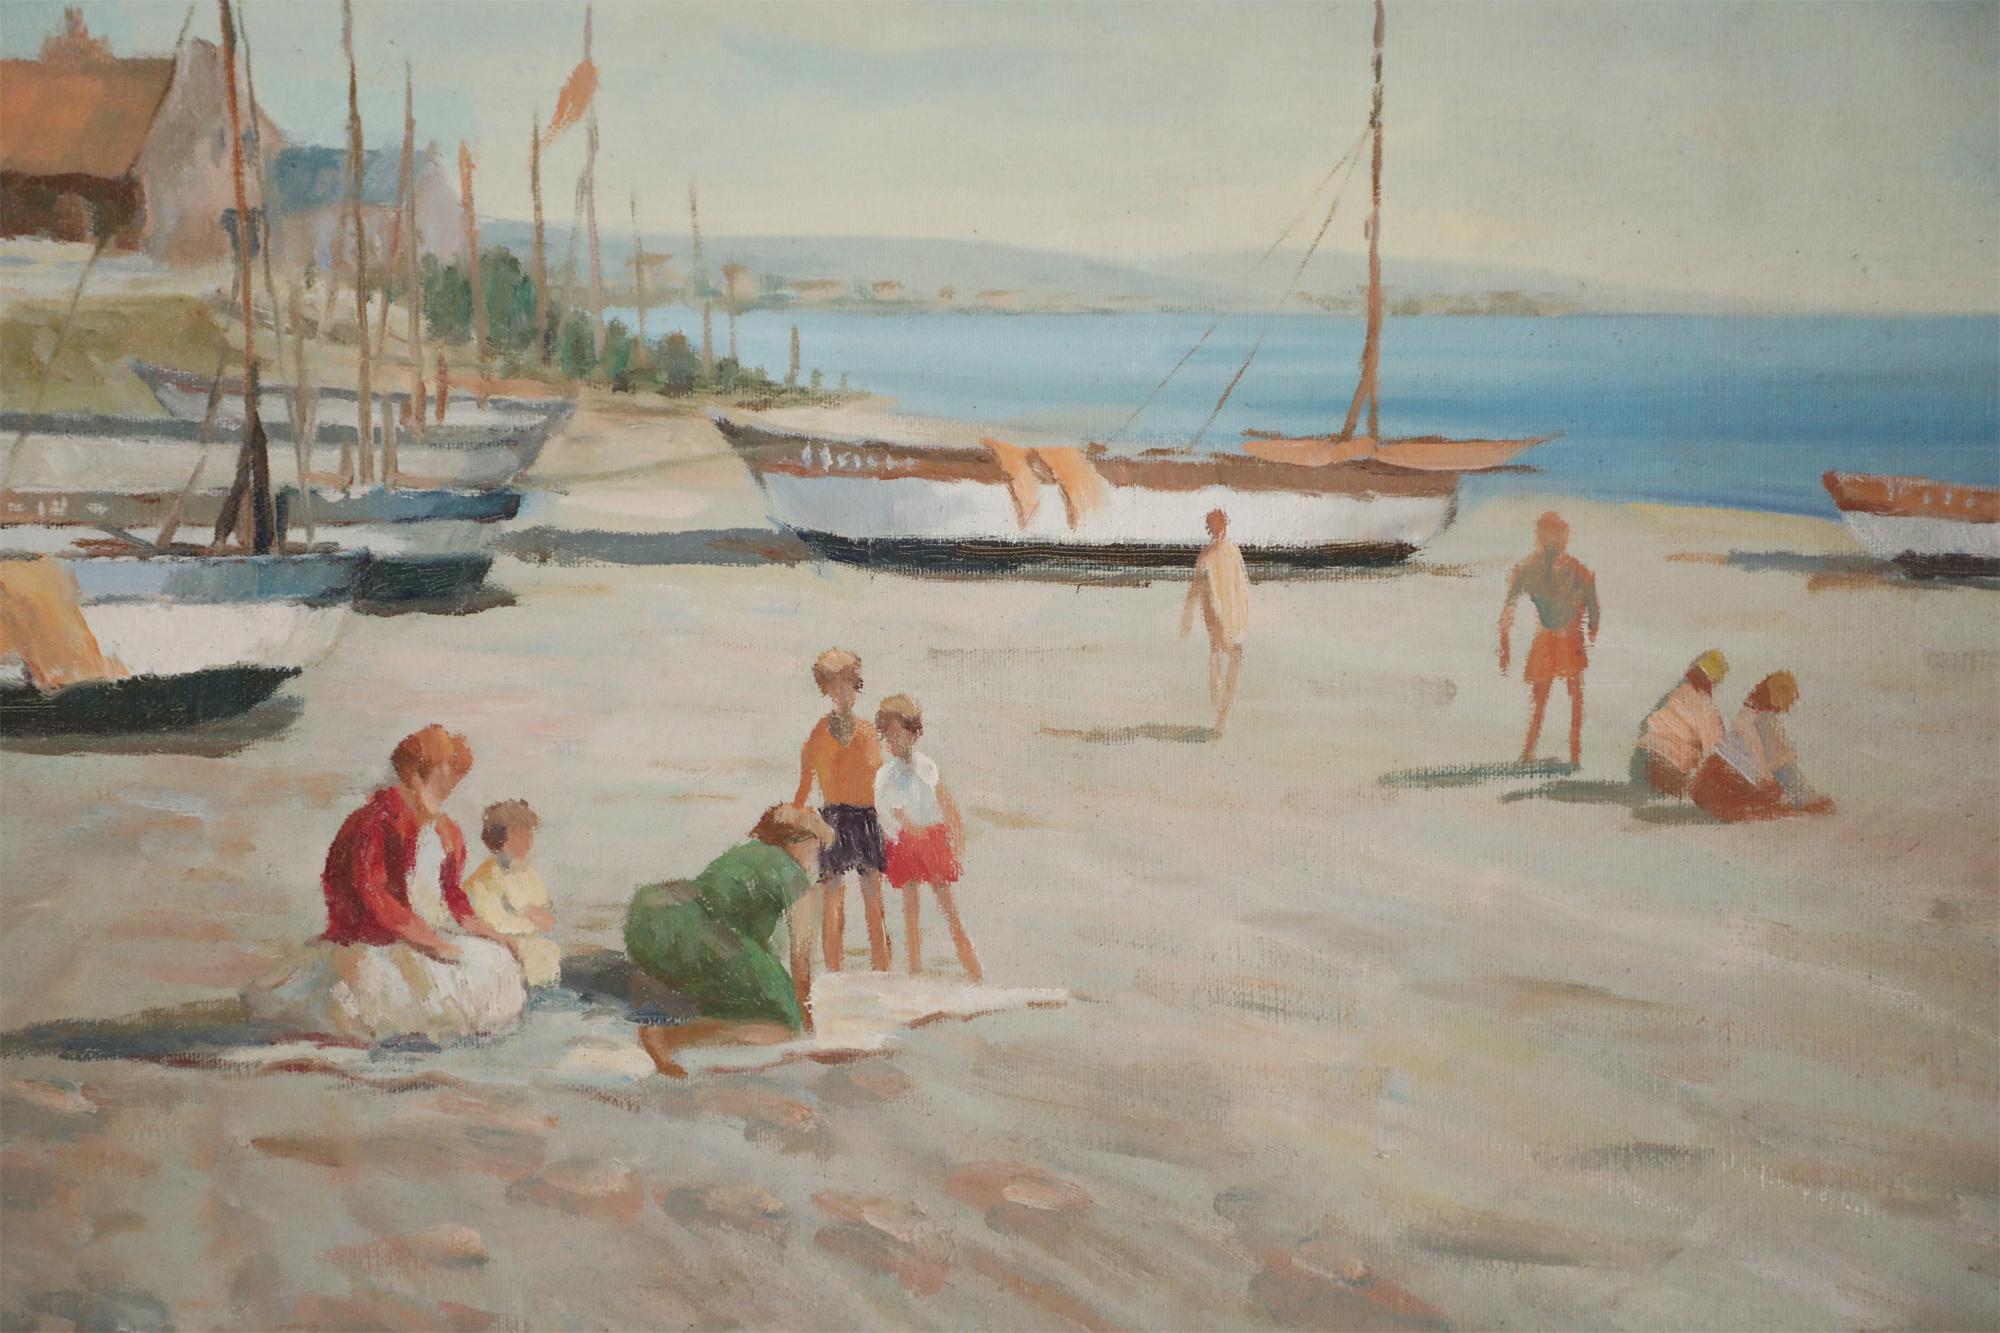 Oiled Framed Boats Ashore at Beach Seascape Oil Painting For Sale